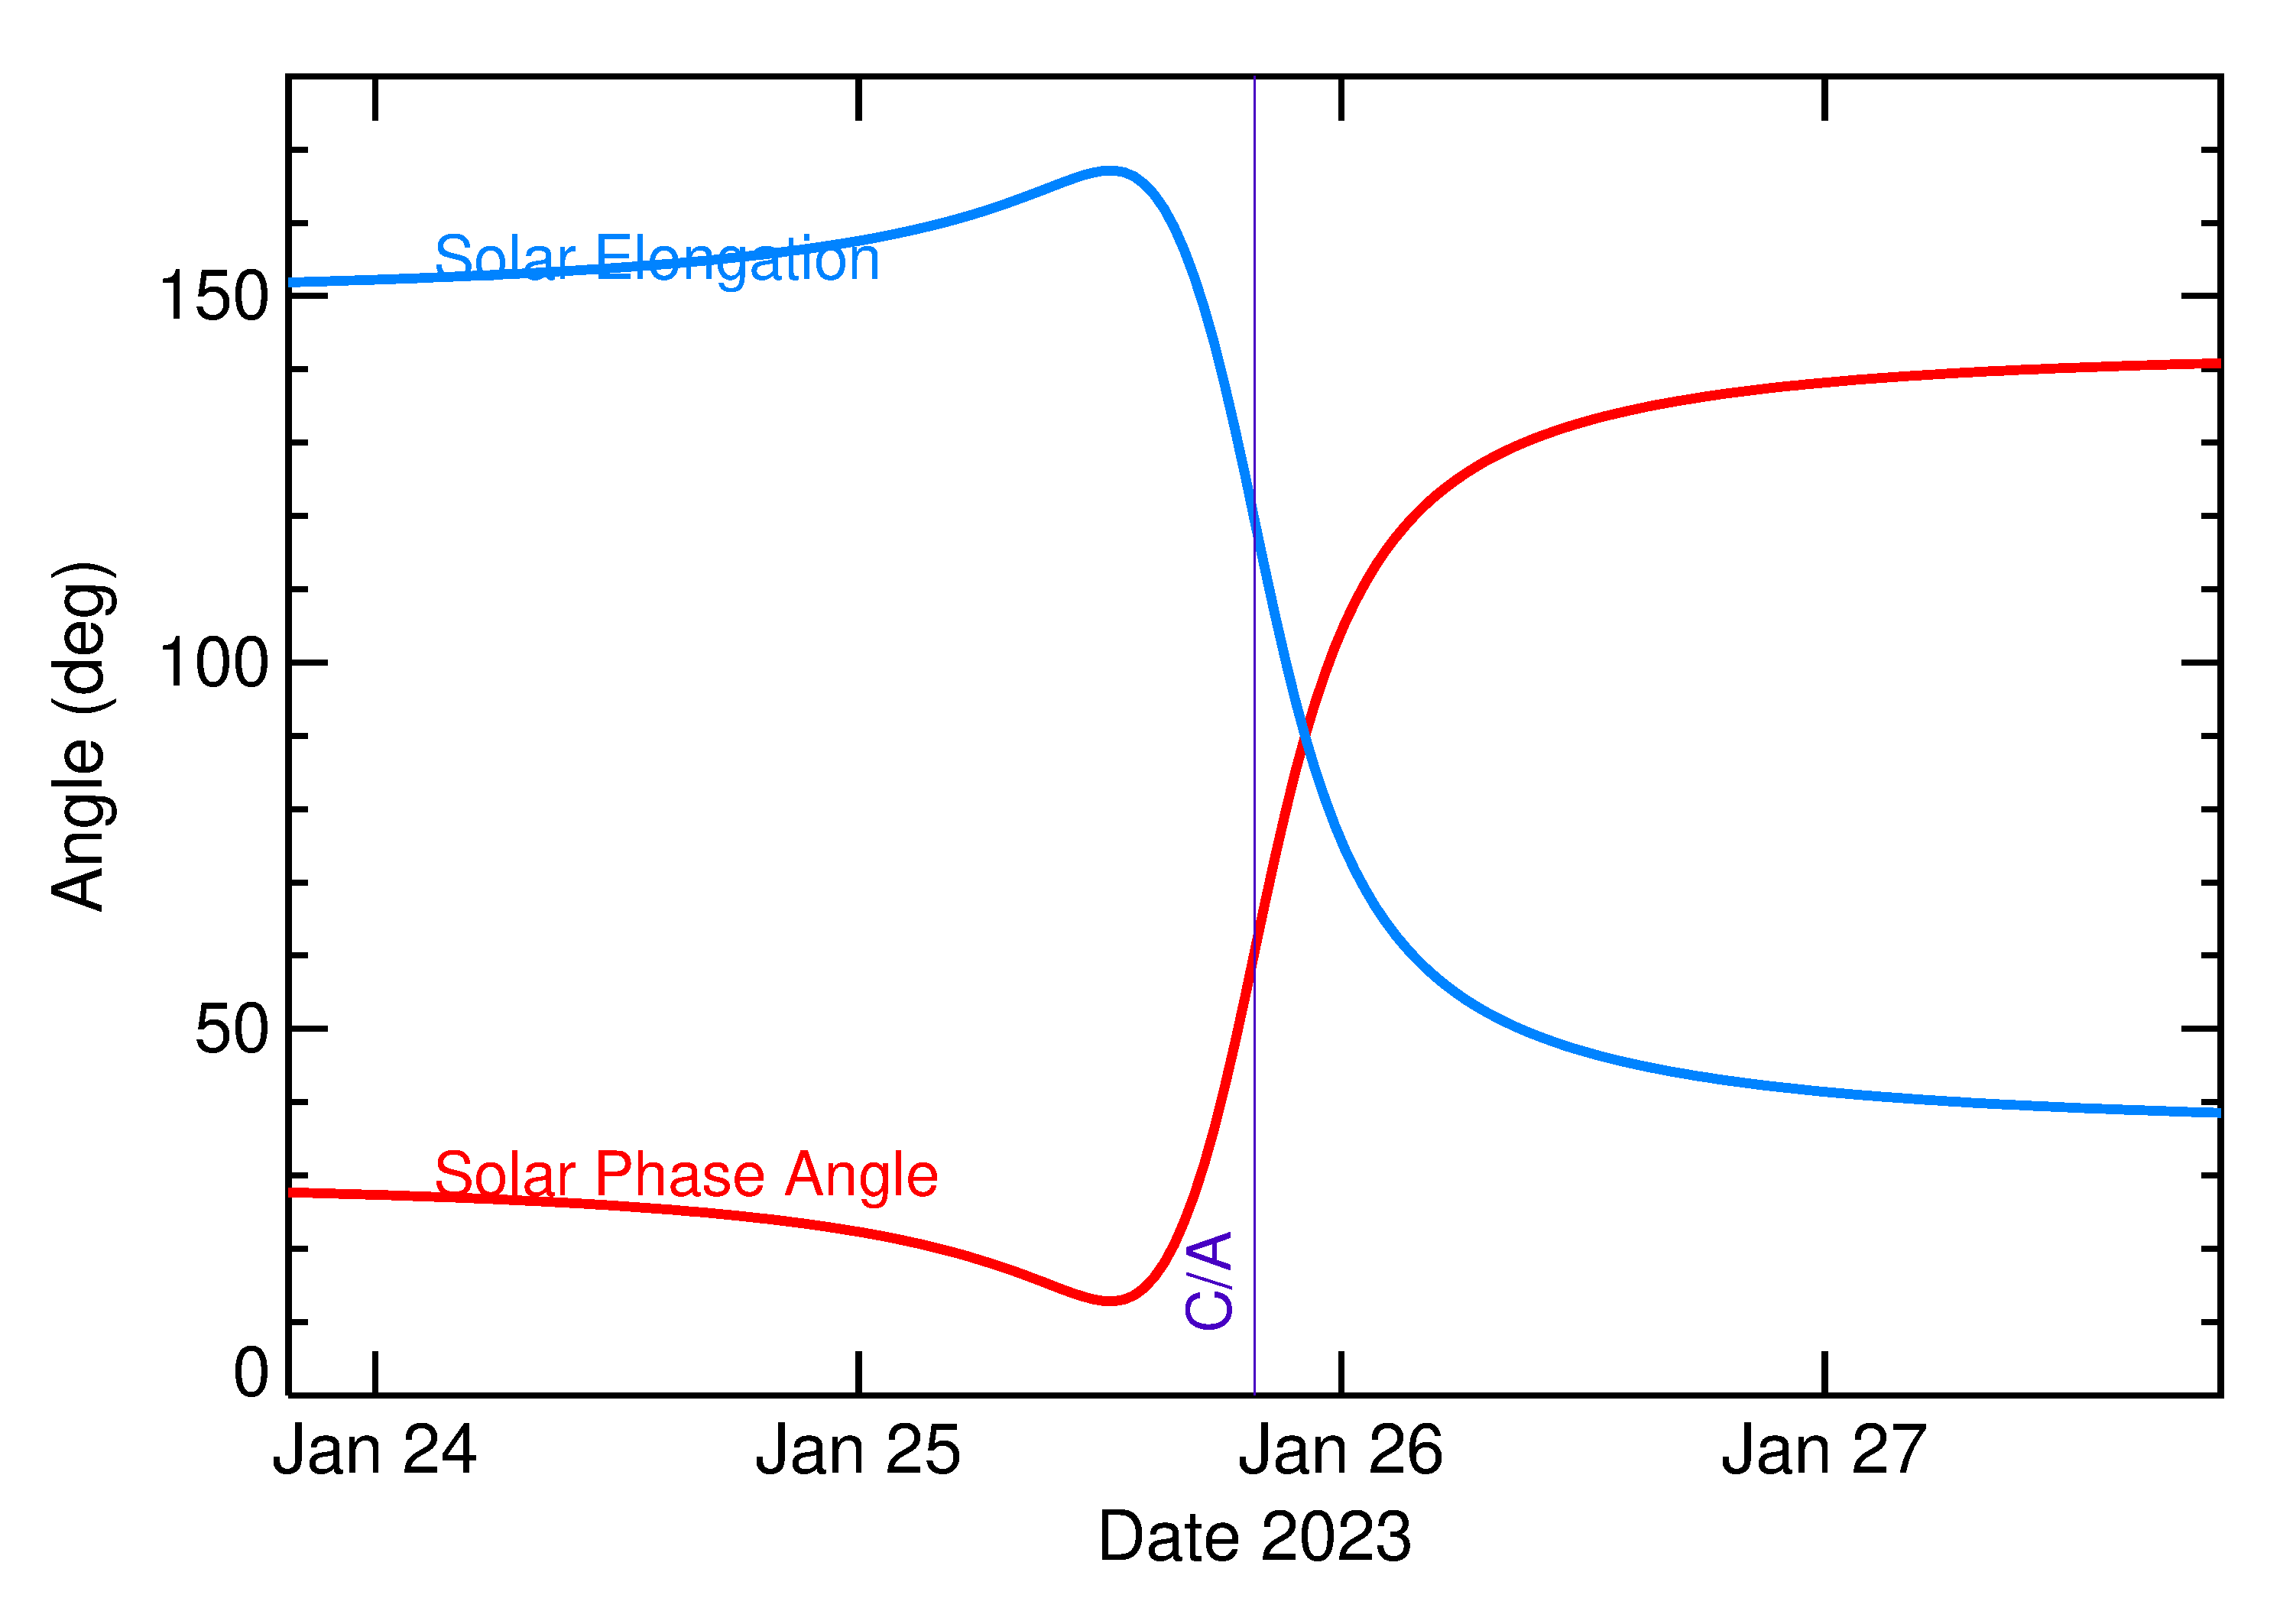 Solar Elongation and Solar Phase Angle of 2023 BL1 in the days around closest approach